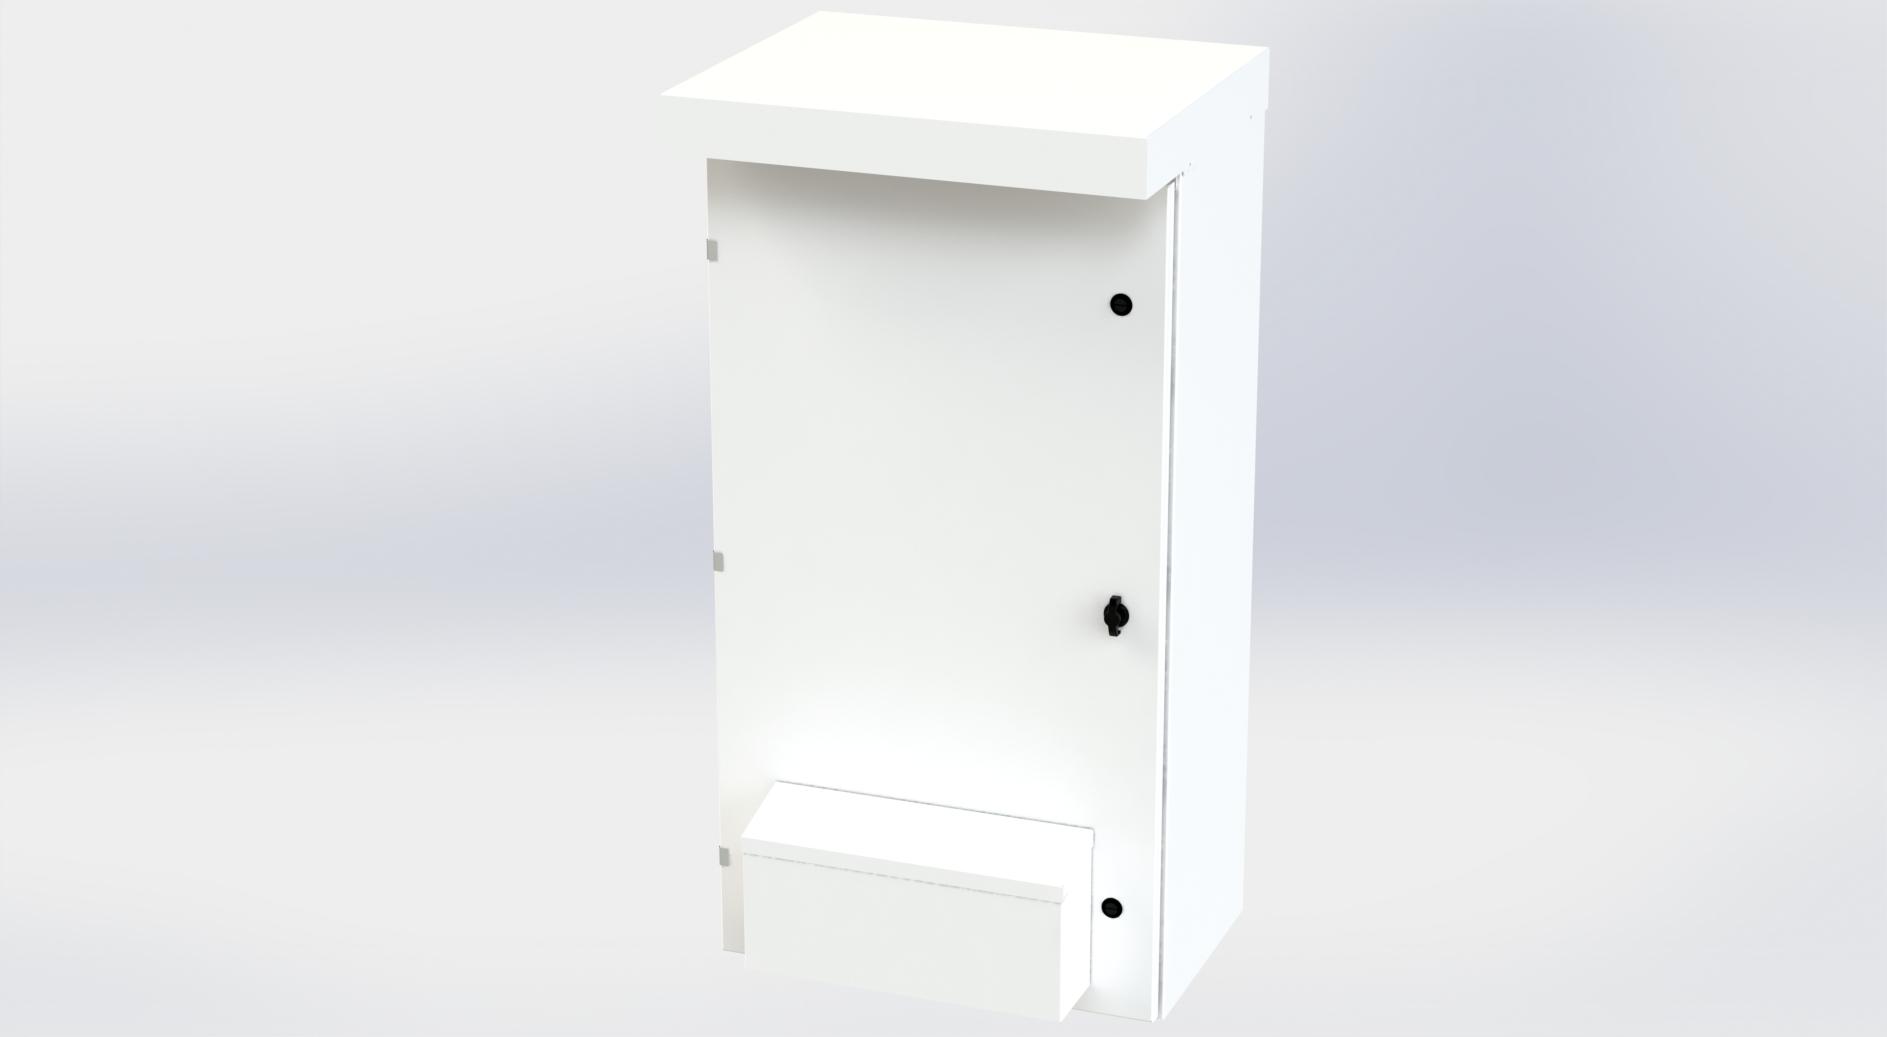 Saginaw Control SCE-47VR2414 Enclosure, Vented Type 3R, Height:47.00", Width:24.00", Depth:14.00", White powder coating inside and out. Optional sub-panels are powder coated white.